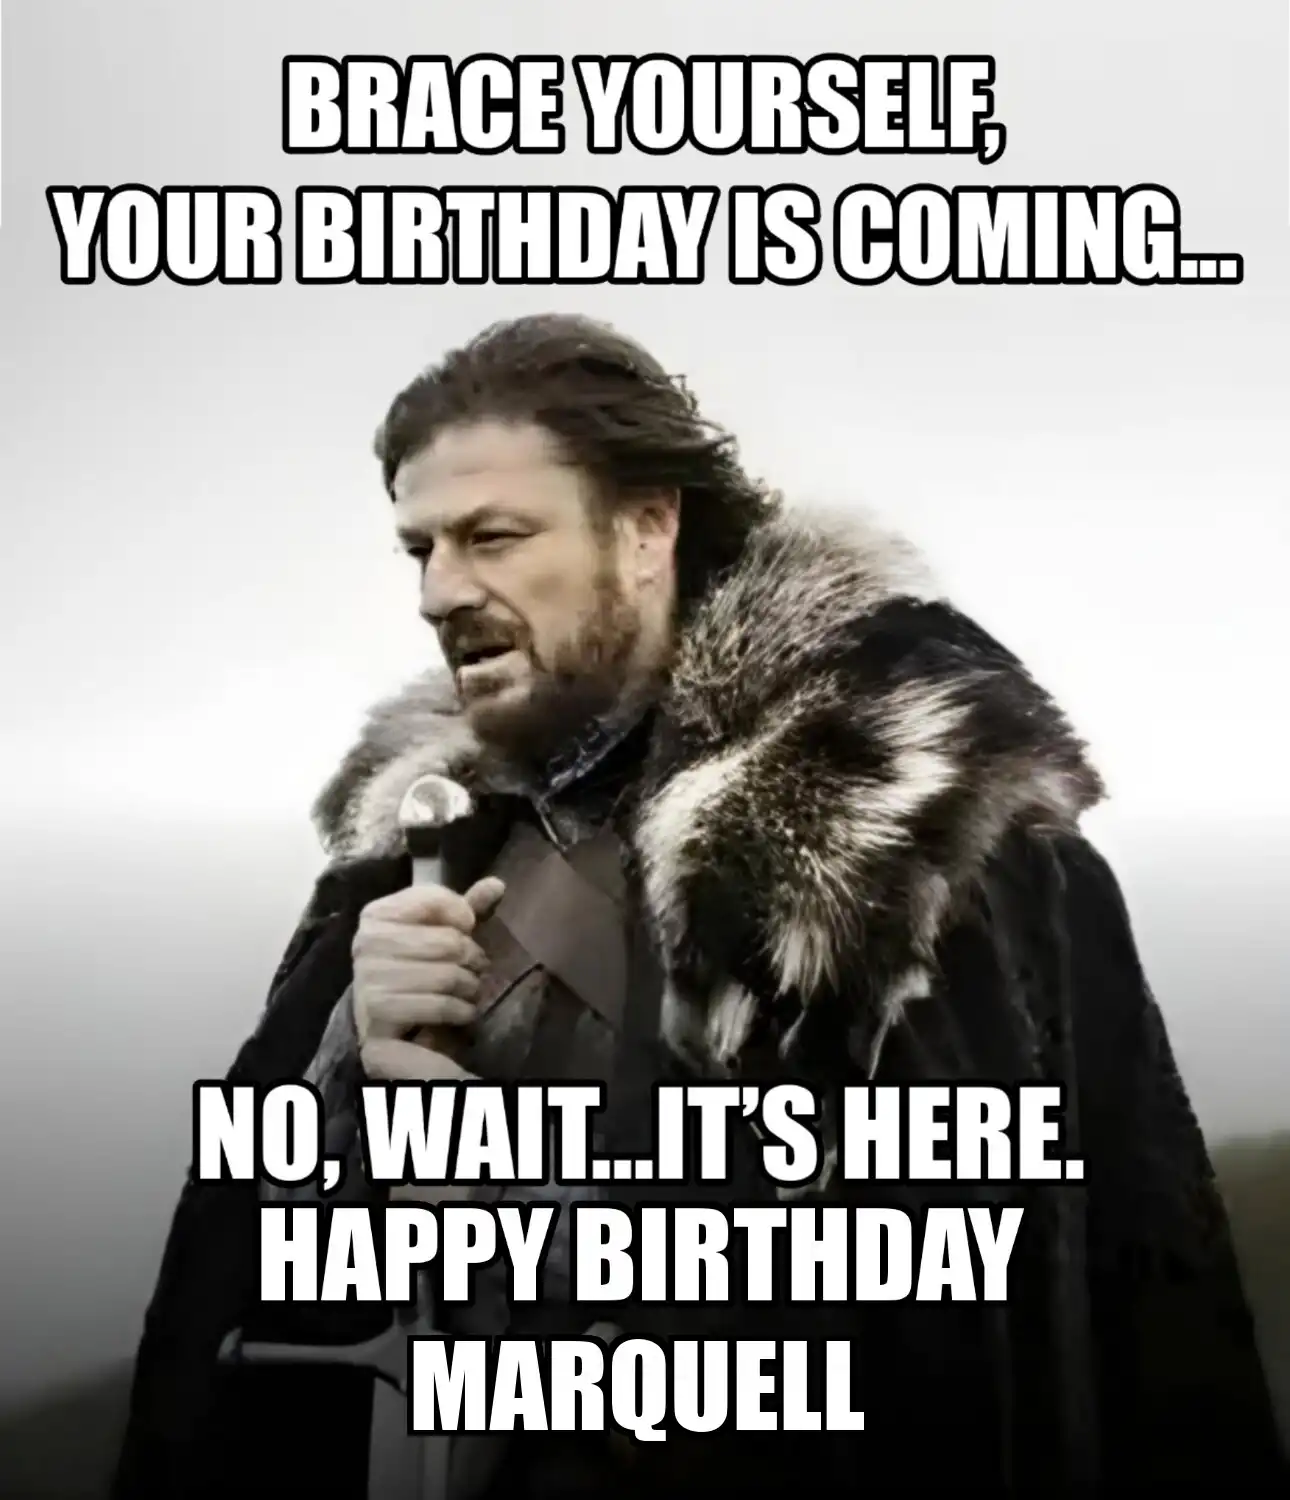 Happy Birthday Marquell Brace Yourself Your Birthday Is Coming Meme